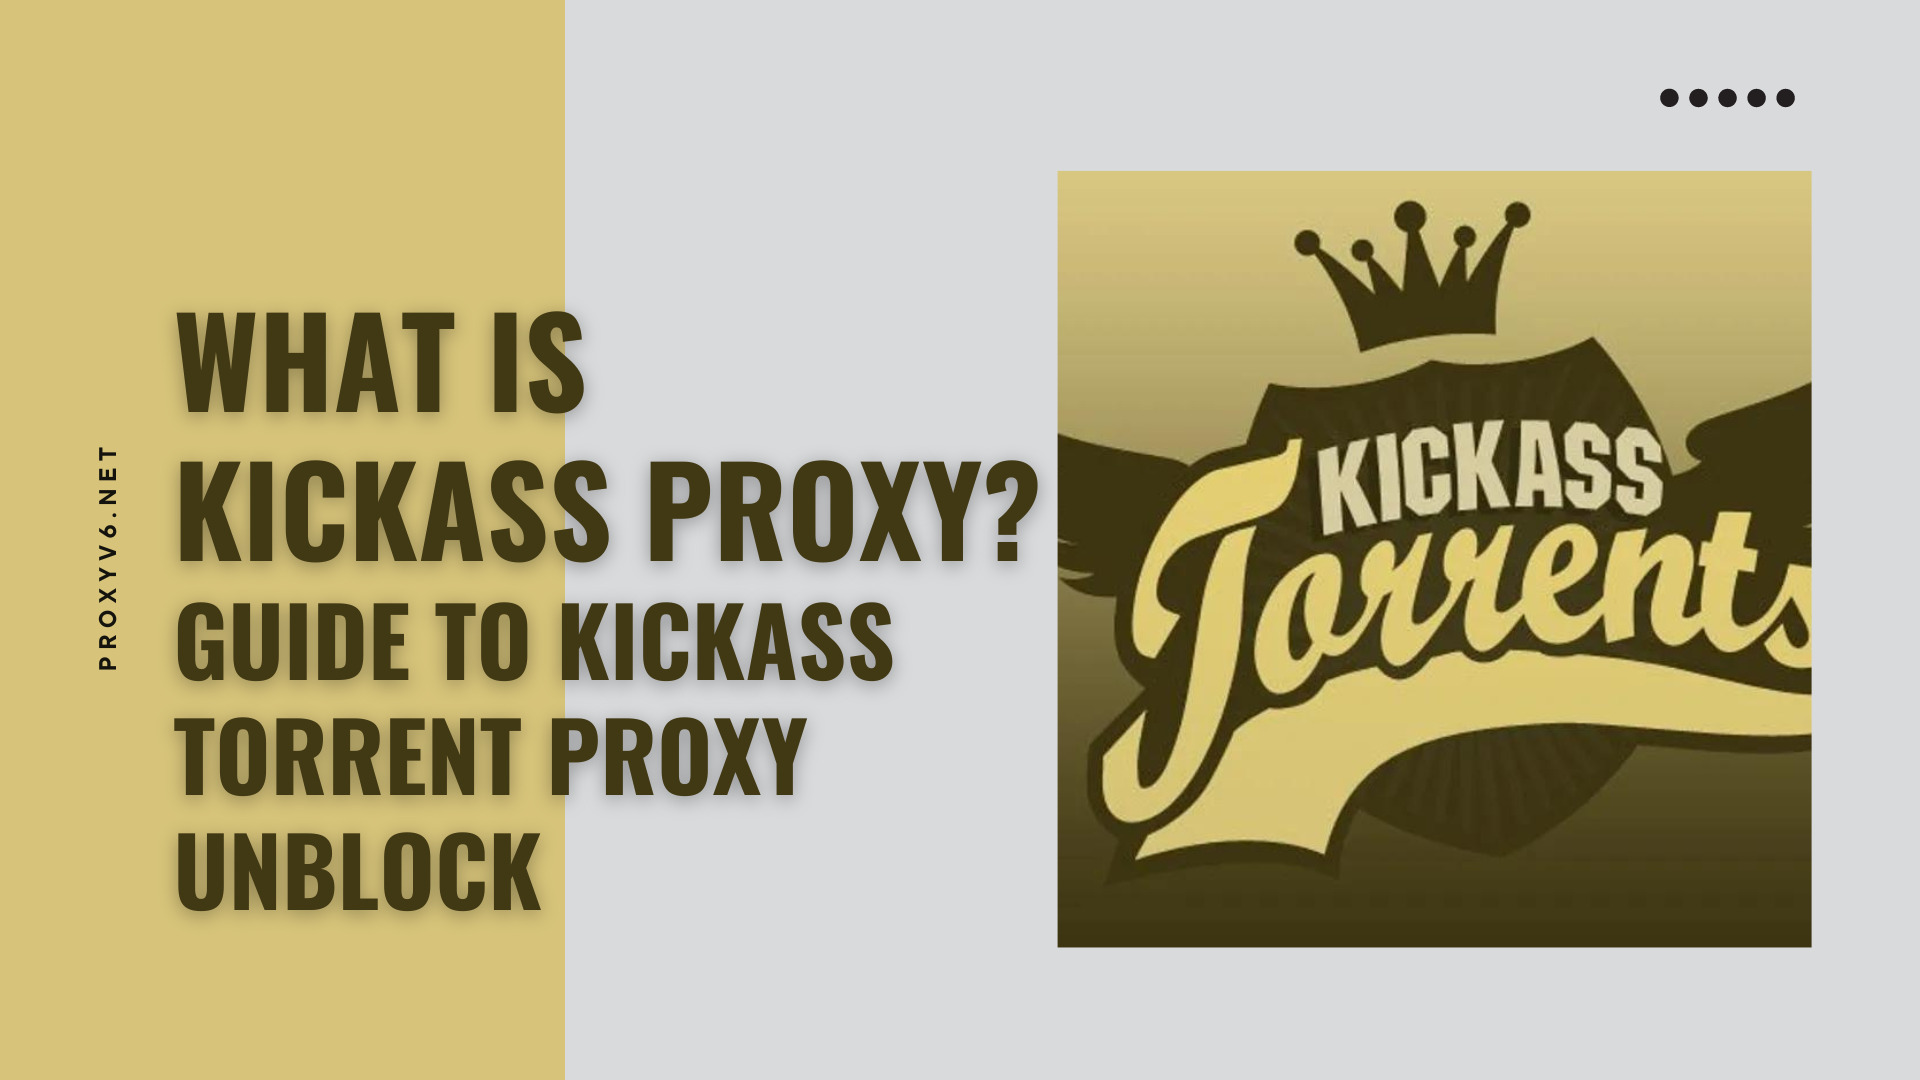 What is Kickass Proxy? Guide to Kickass Torrent Proxy unblock